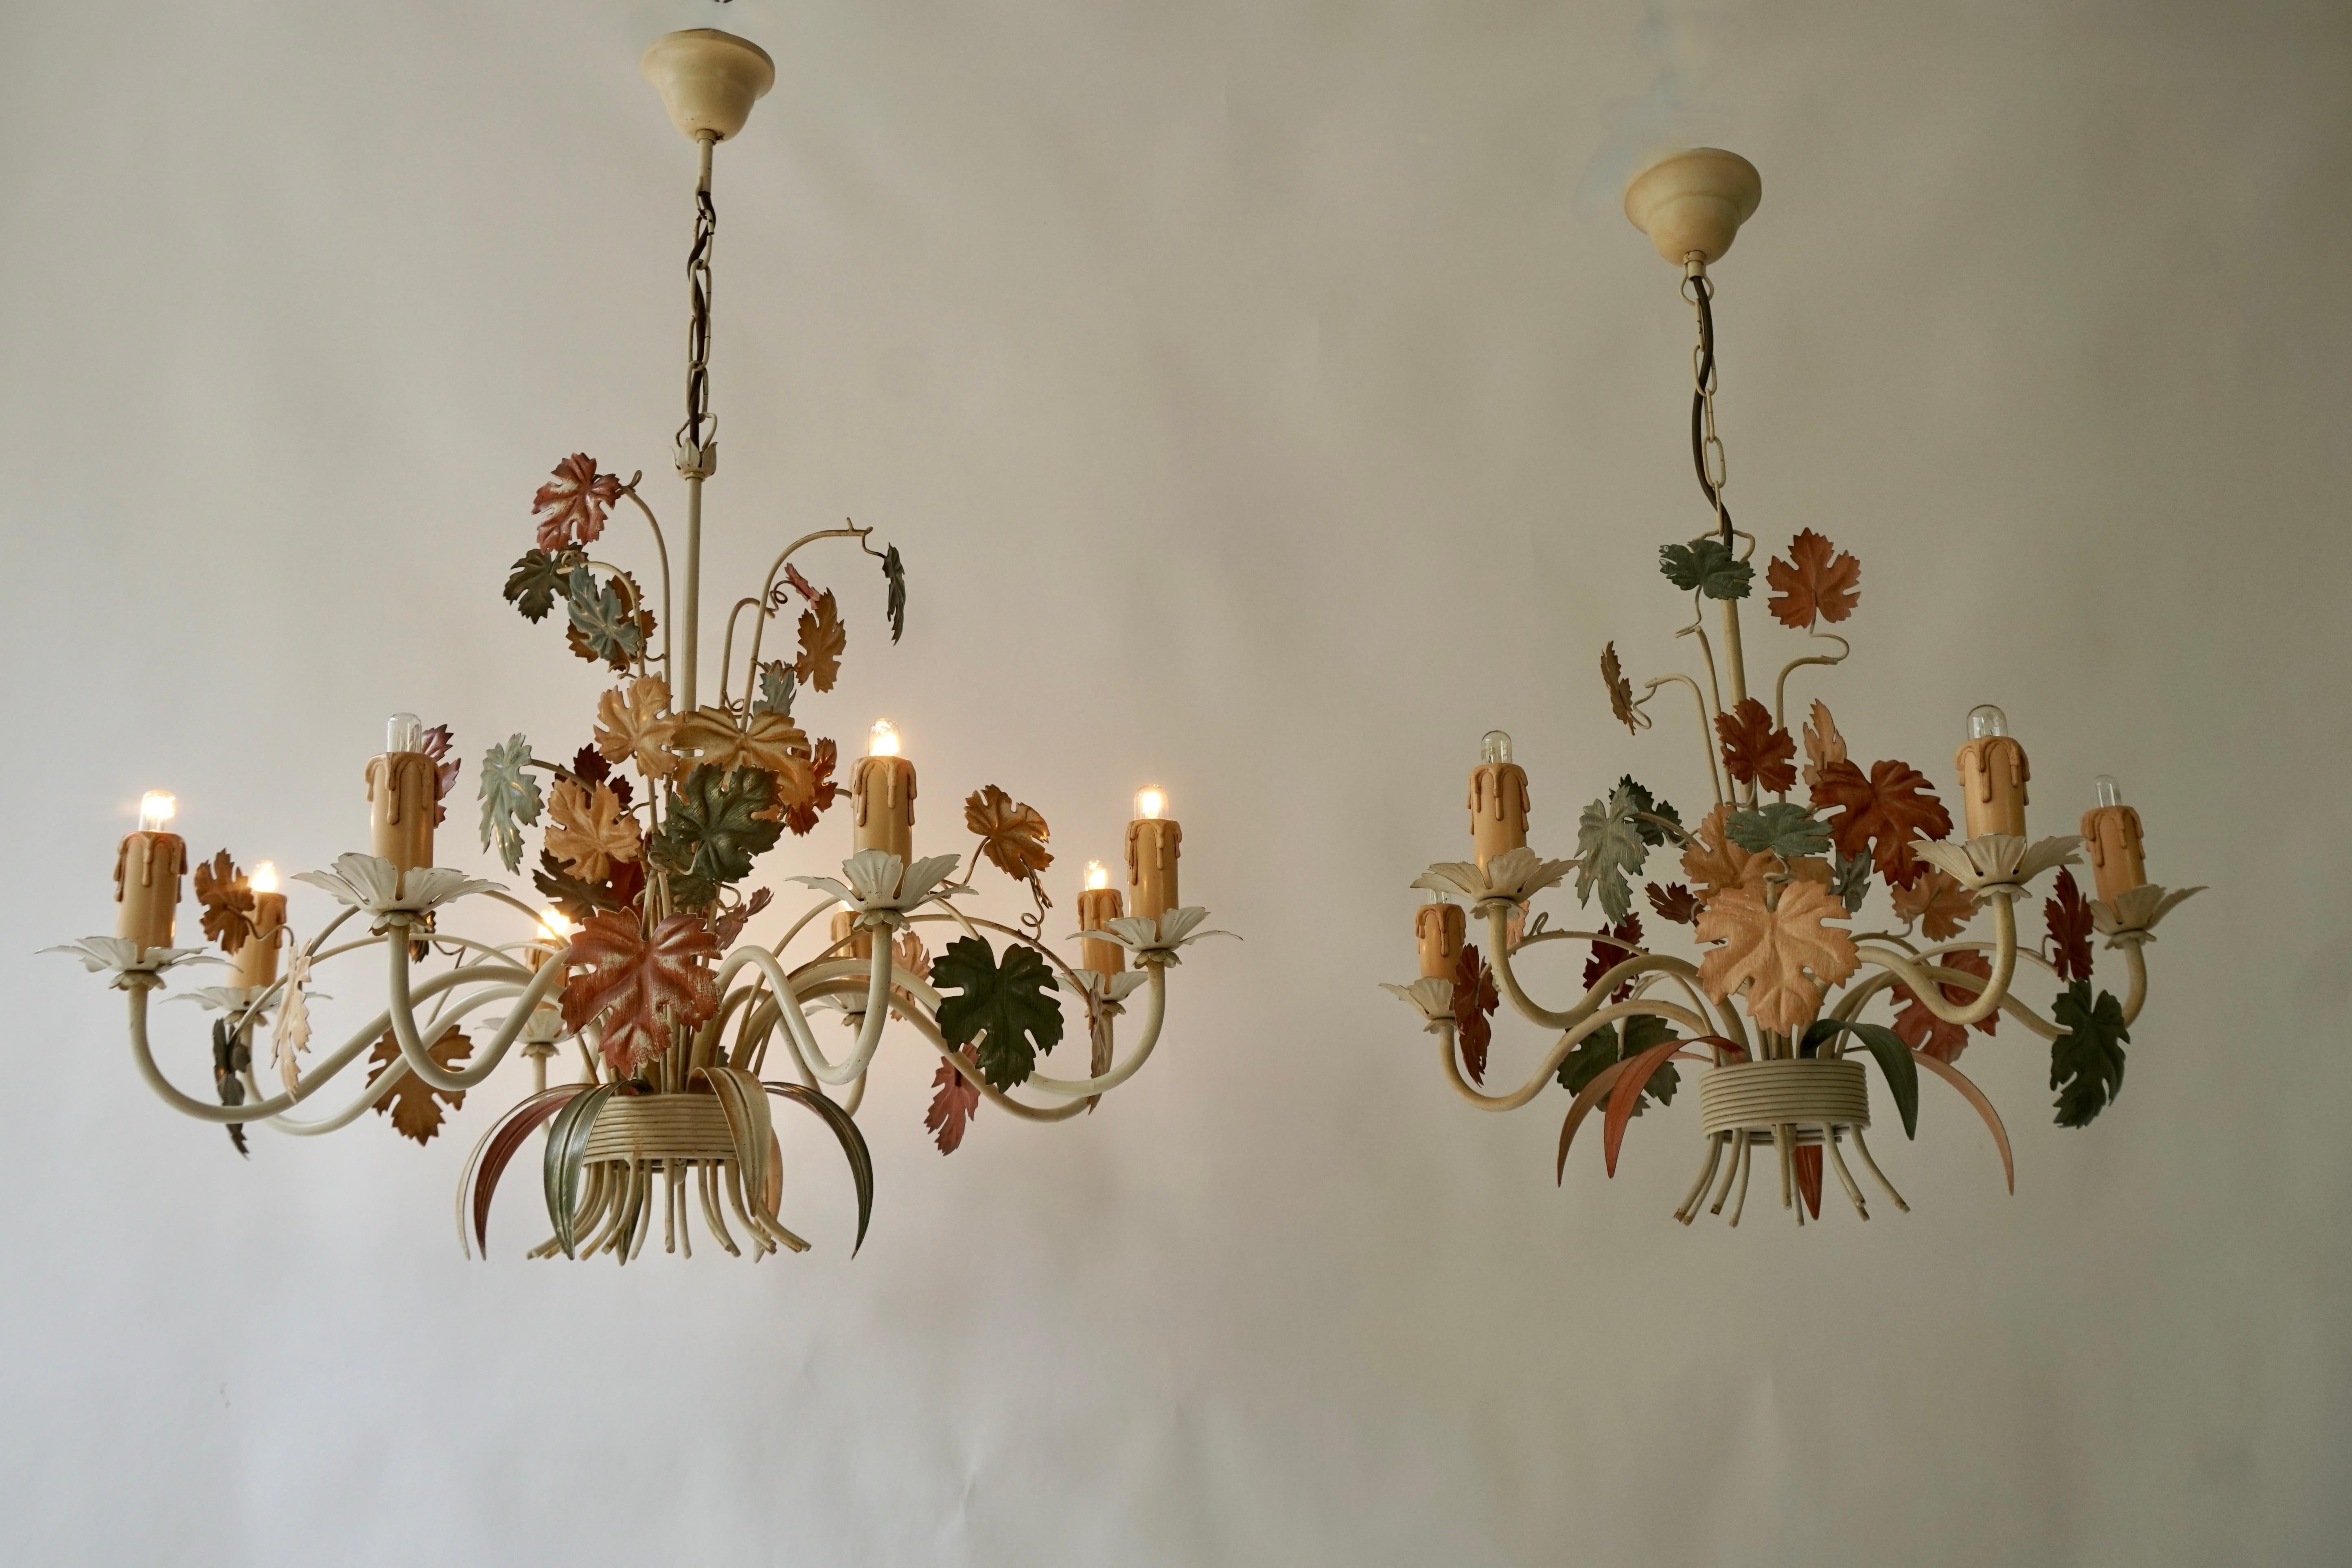 Three Vintage Italian Tole Floral Chandeliers With Leaves For Sale 1